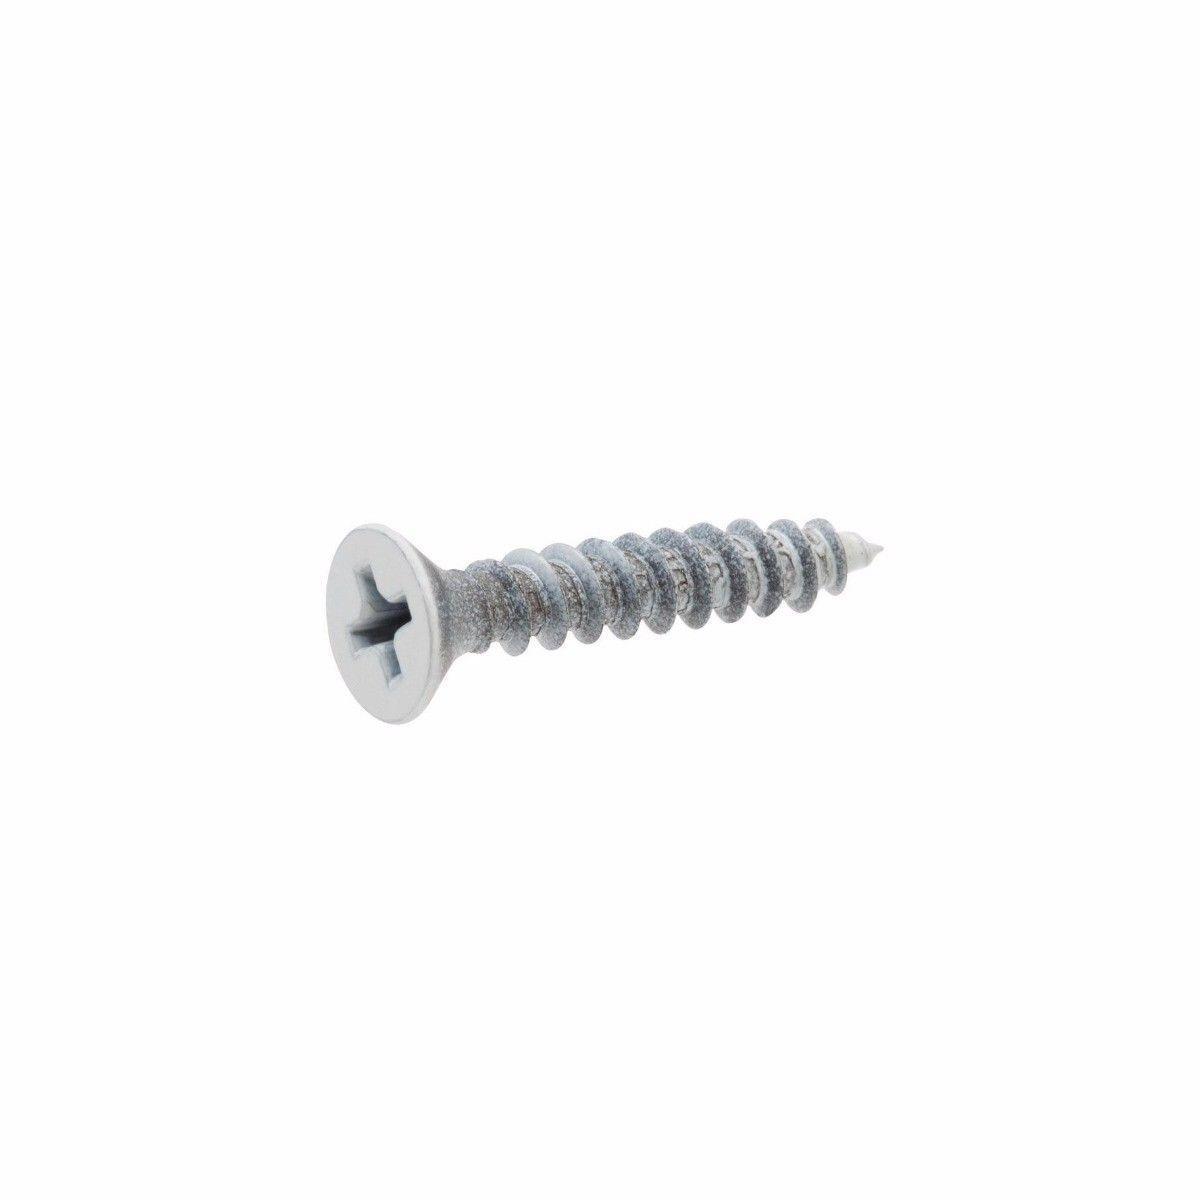 Pack Of 80 Zinc Wood Screws 6 x 5/8 Pozi Countersunk Hardened Twin Thread 0001 (Large Letter Rate)